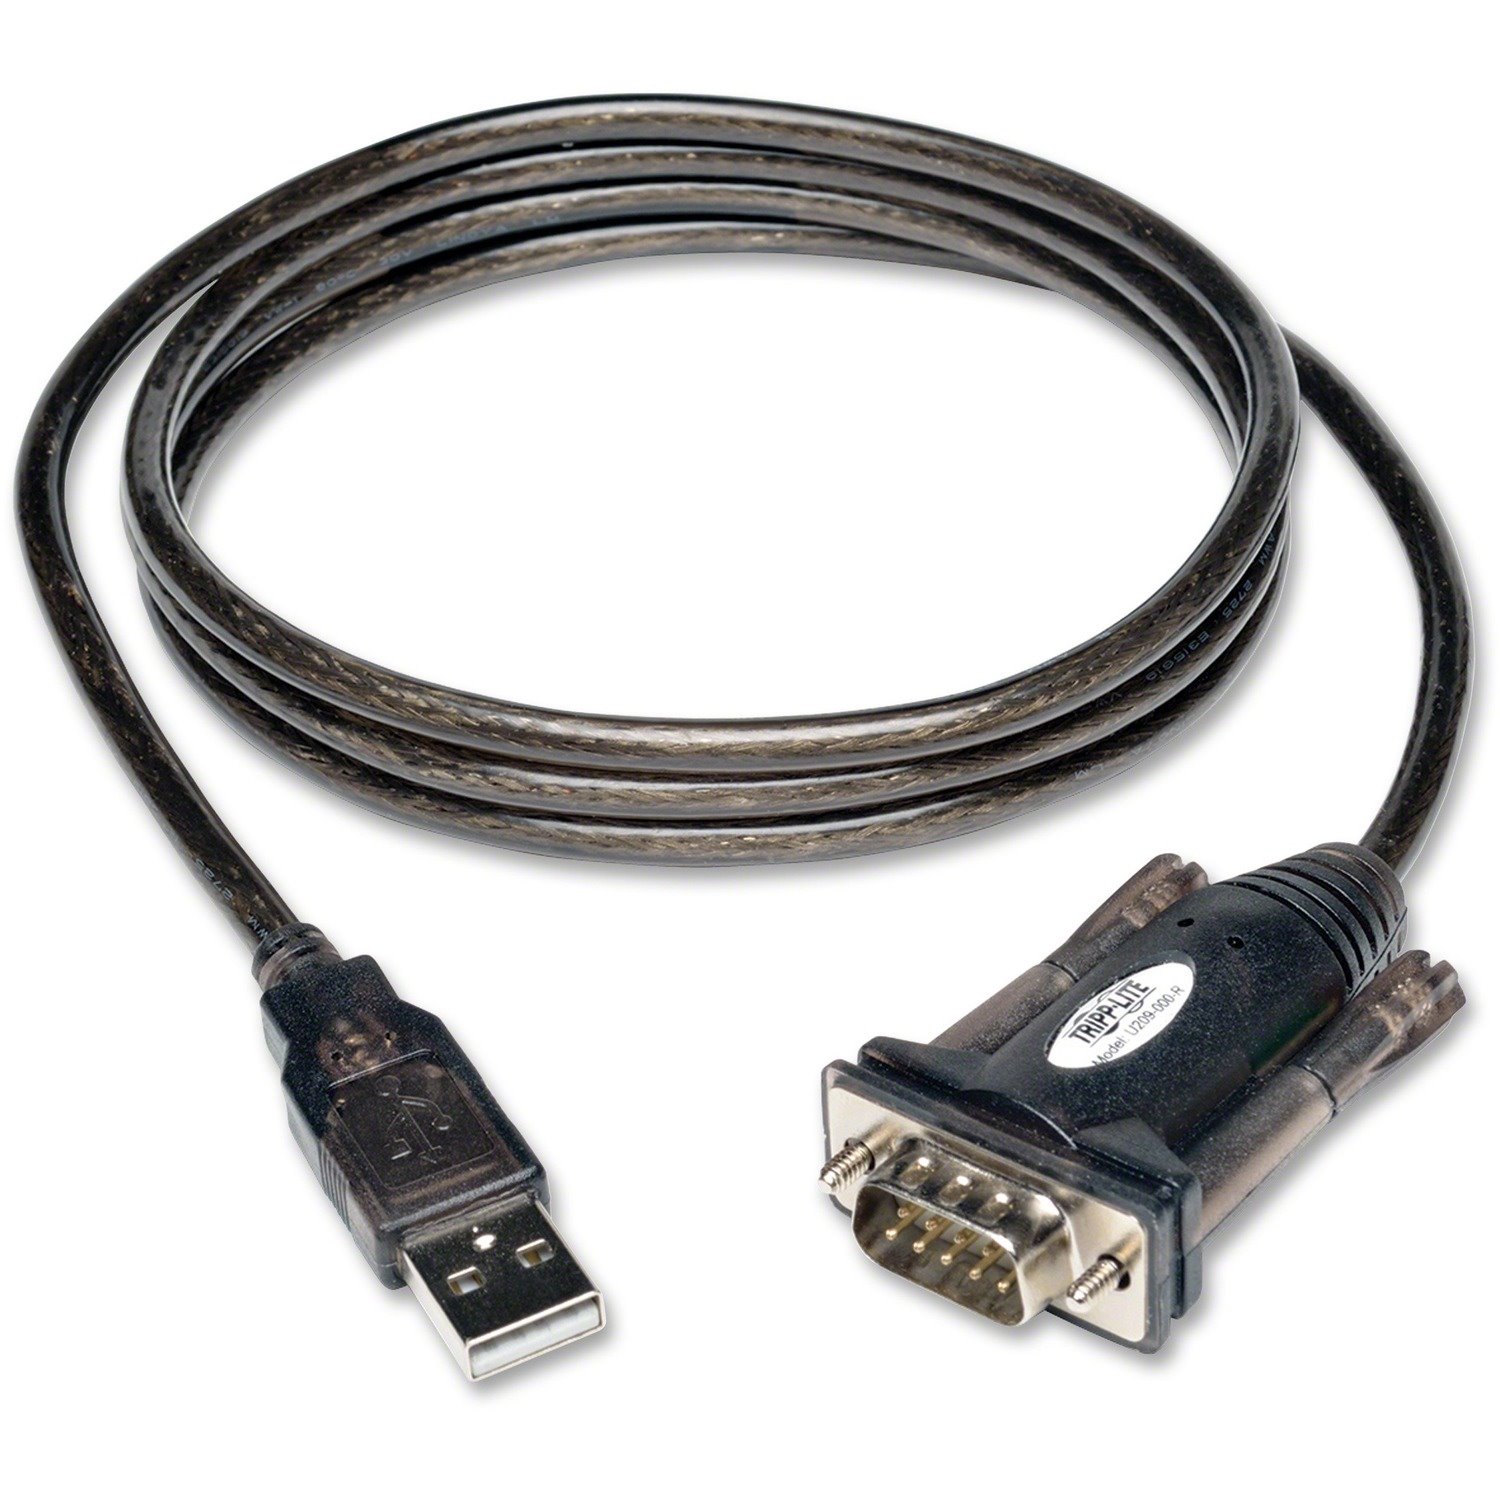 Eaton Tripp Lite Series USB-A to RS-232 (DB9) Serial Adapter Cable (M/M), 5 ft. (1.5 m)